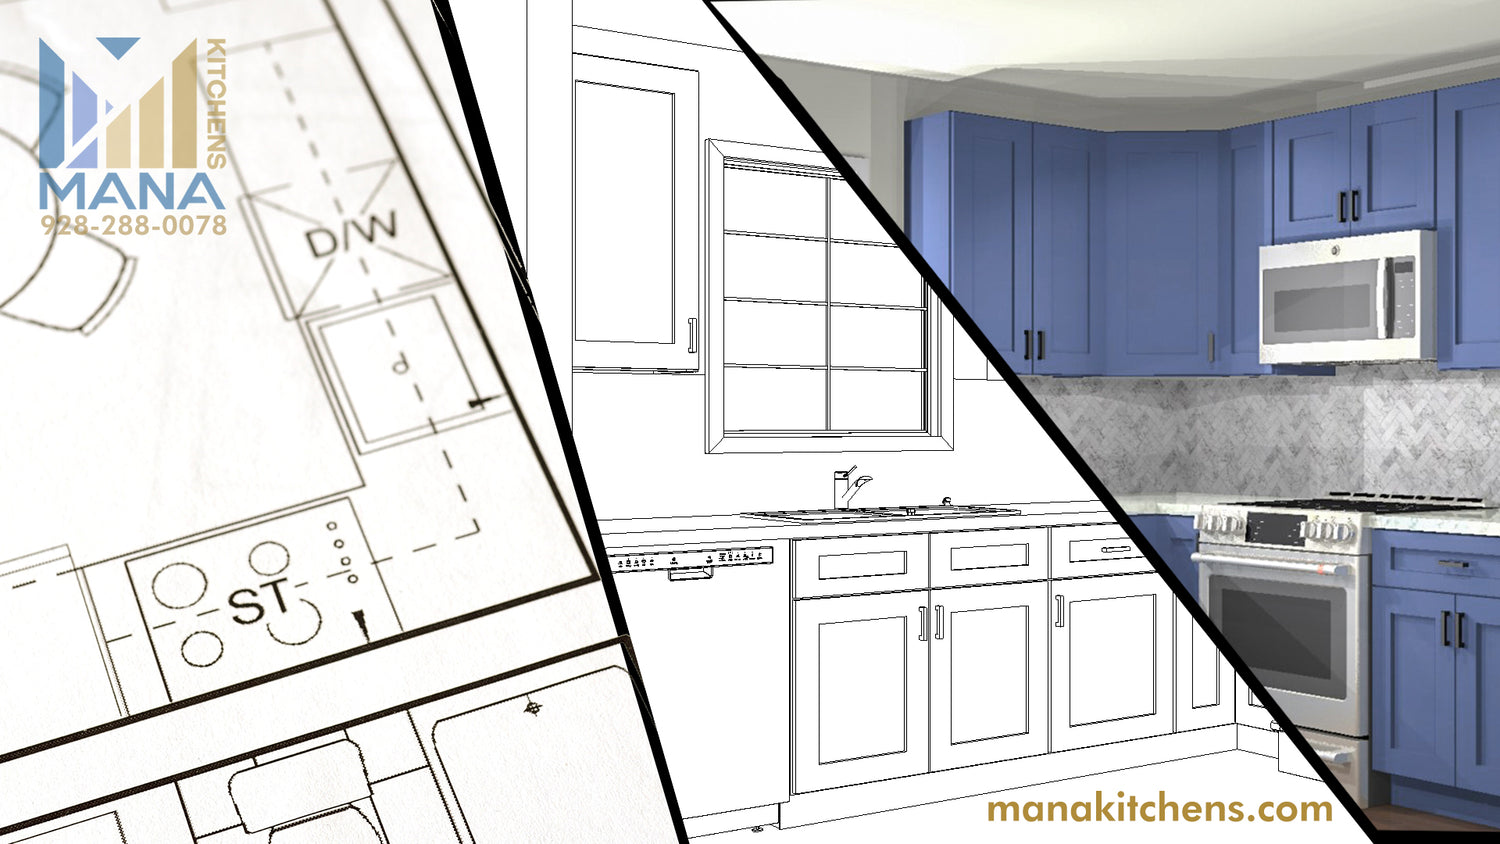 Clip art showing the simple process of getting the 3D design done by Mana Kitchens